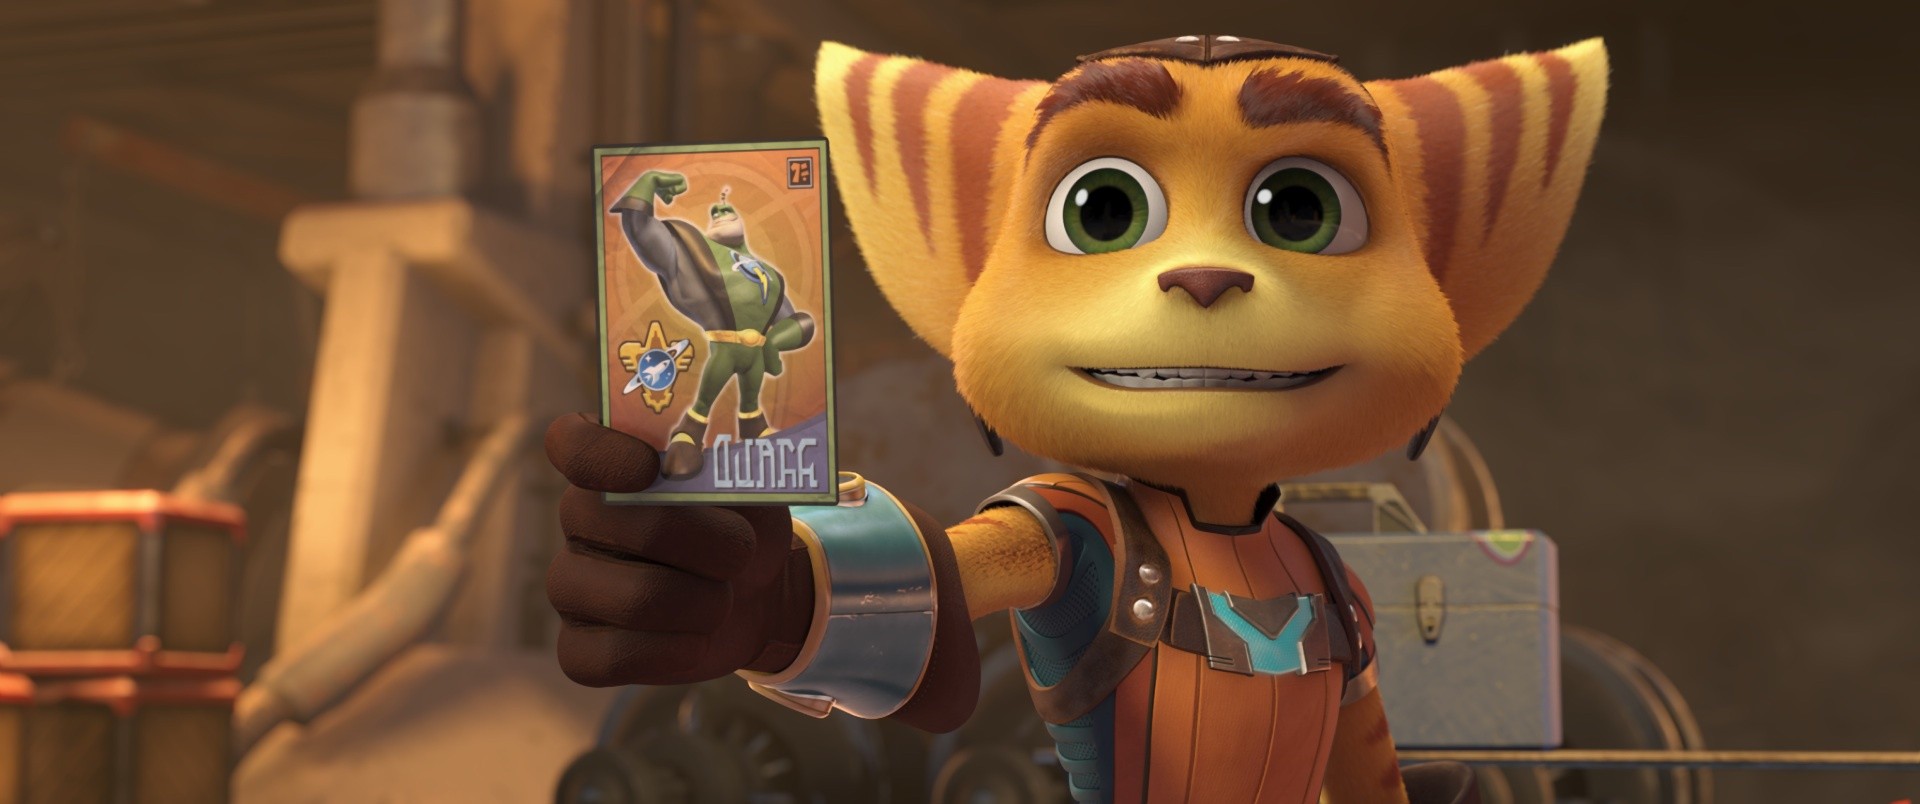 Ratchet from Gramercy Pictures' Ratchet & Clank (2016)